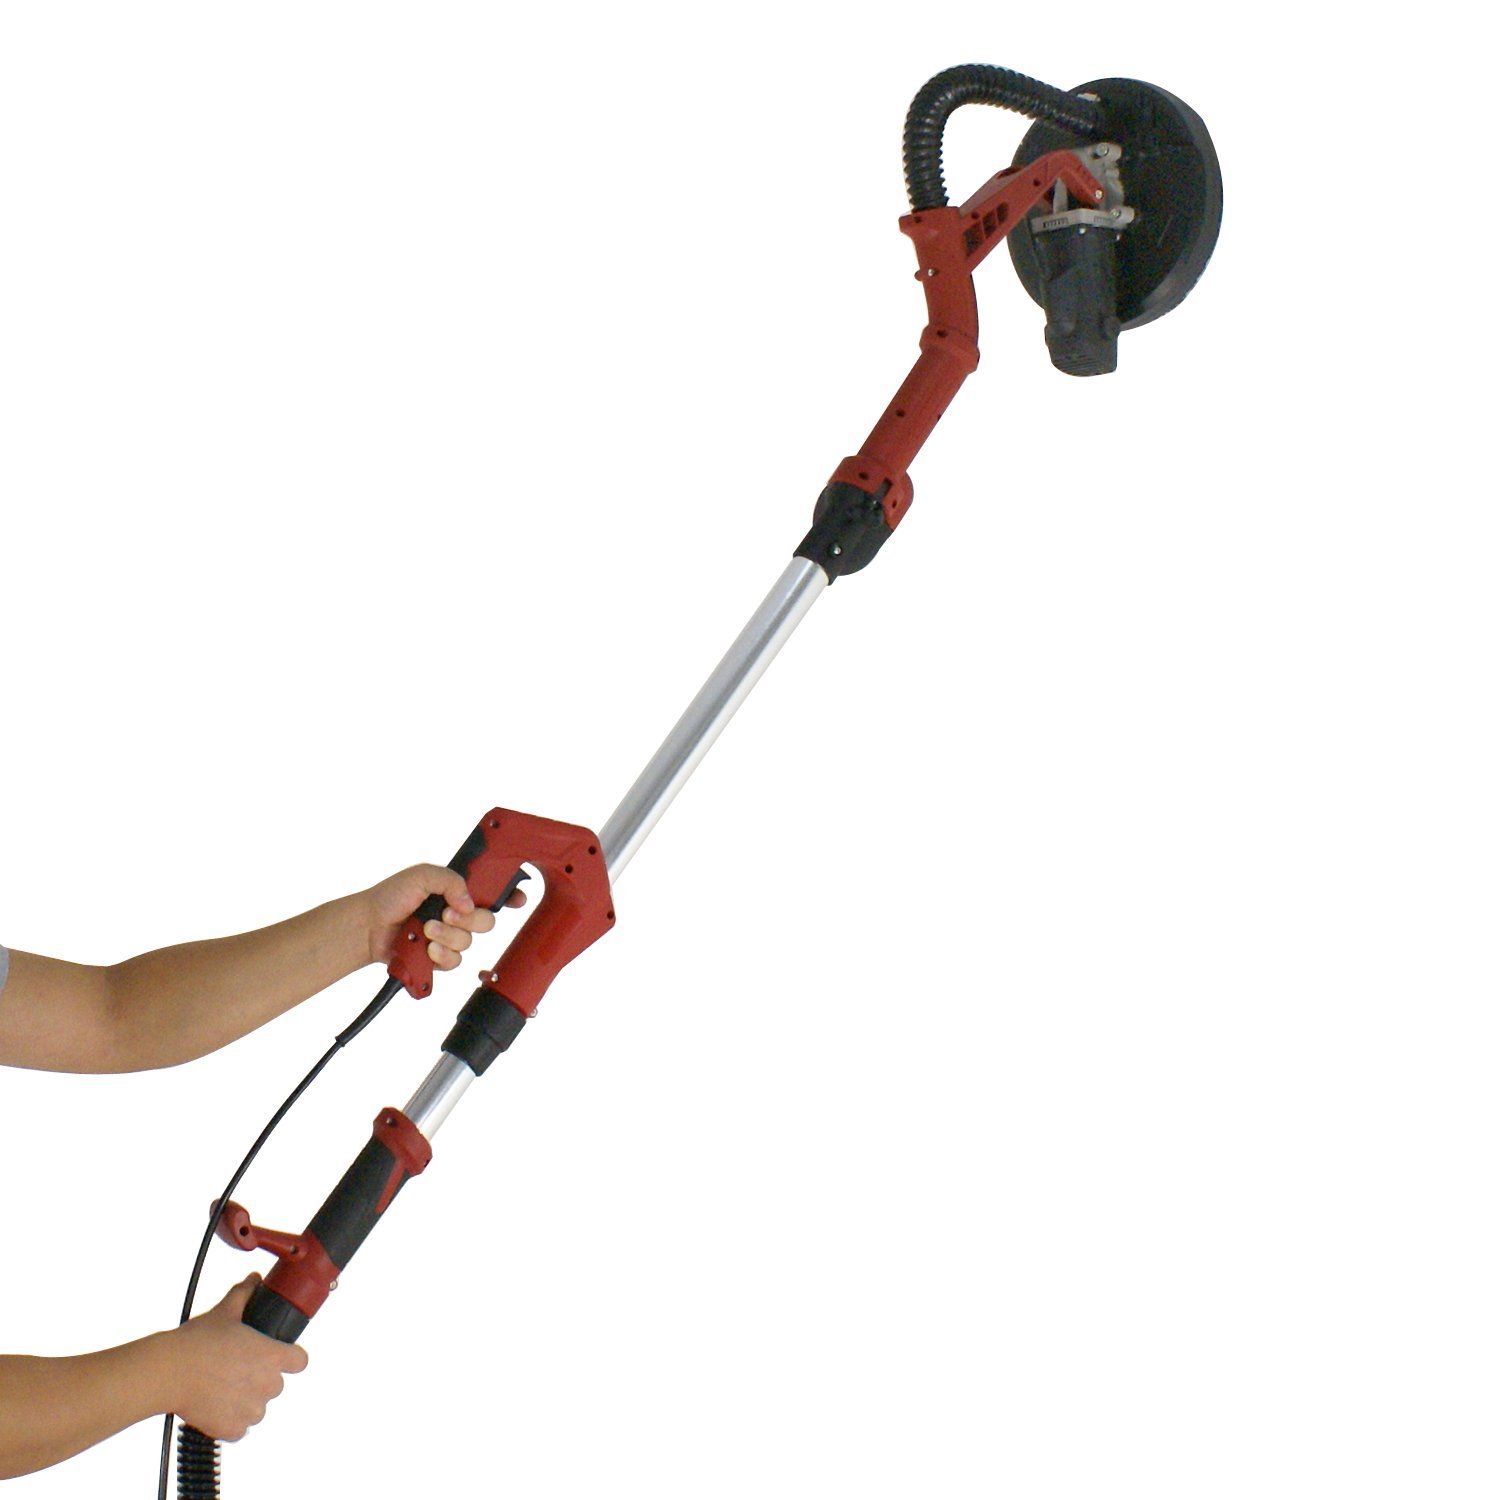 ZENY 800W Electric Drywall Sander Adjustable Variable Speed w 6 Sand